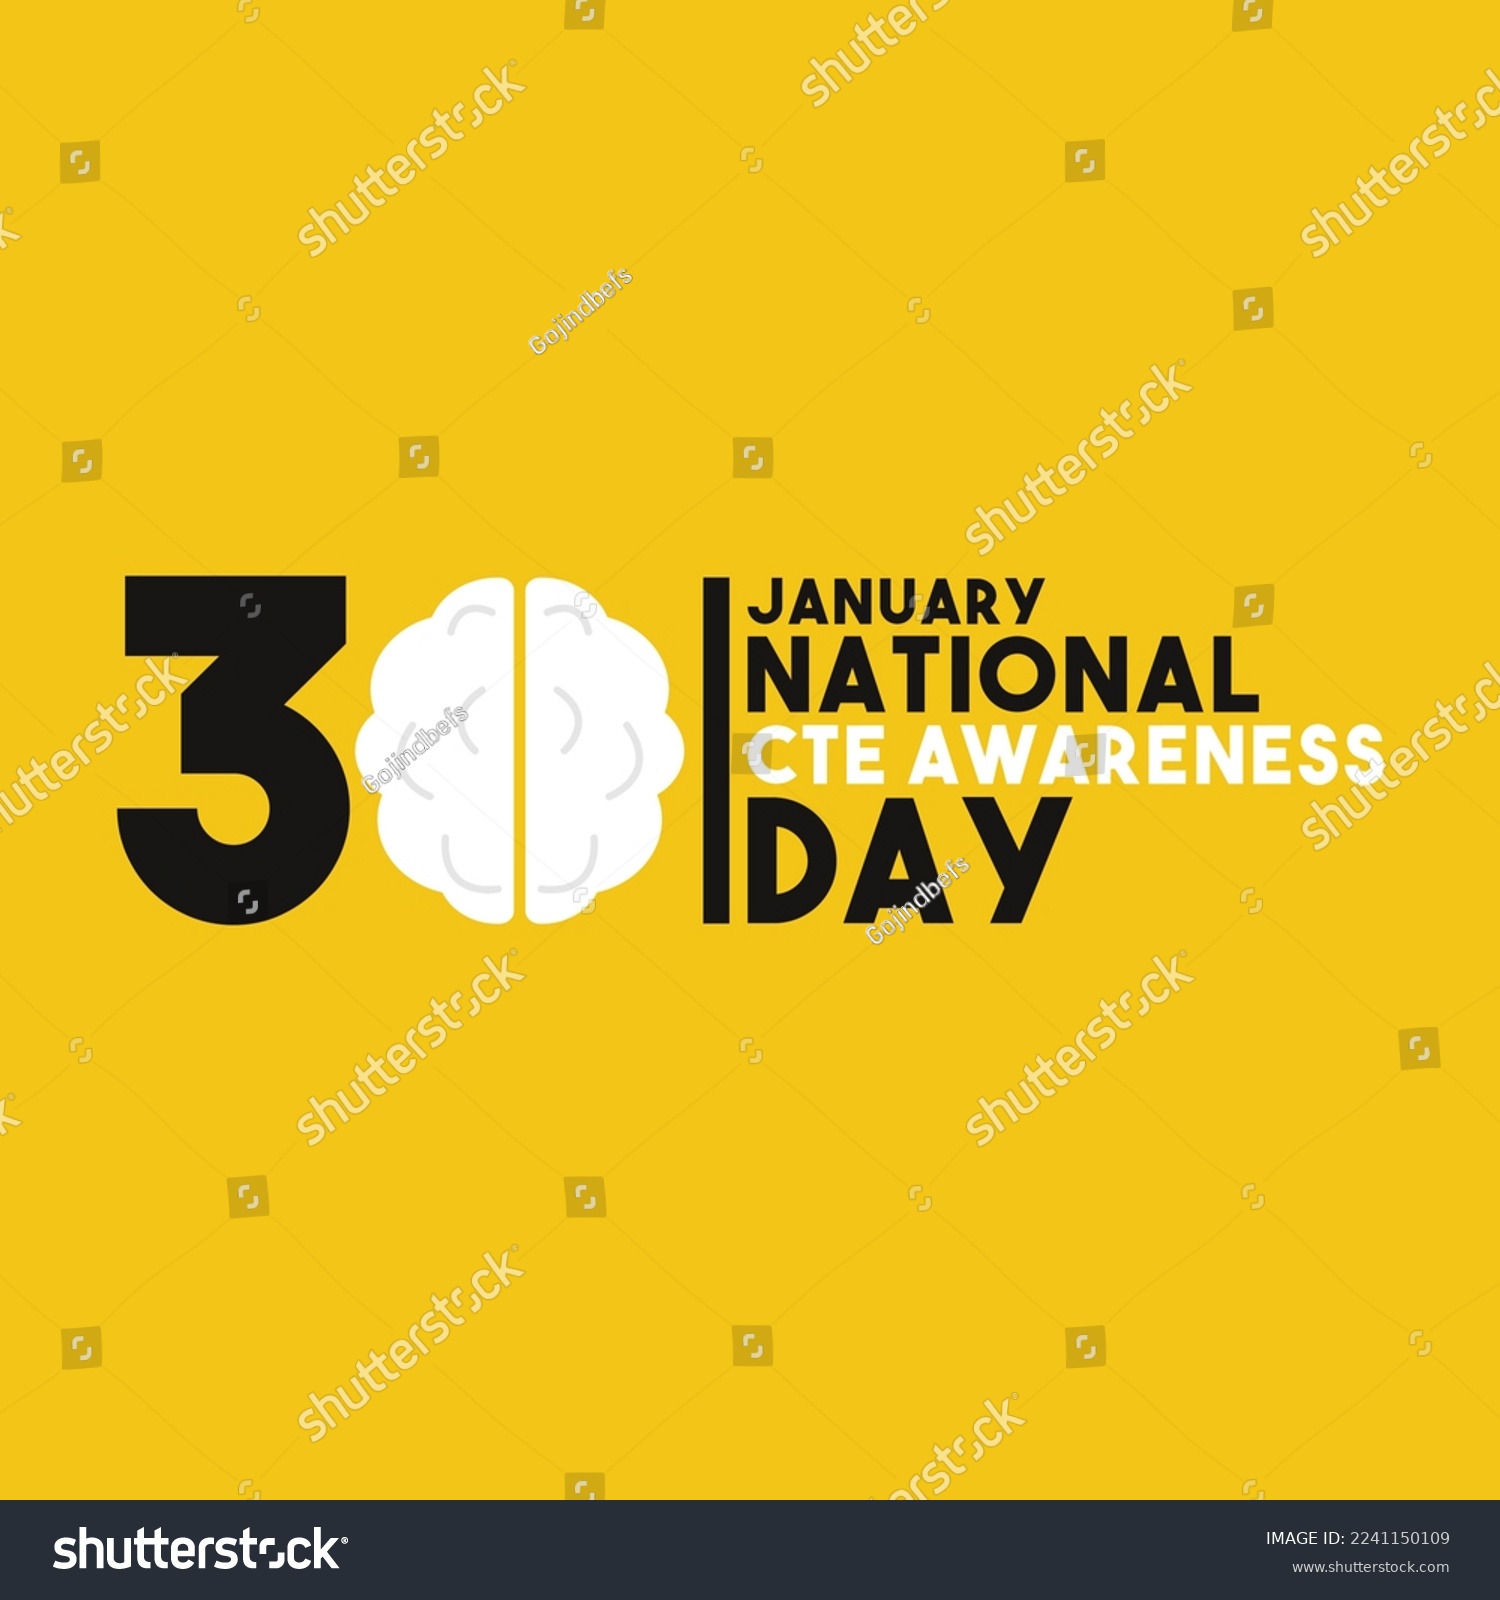 SVG of National CTE Awareness Day. January 30. Yellow background. Black, white, yellow. Brain icon. Poster, banner, card, background. Eps 10. svg